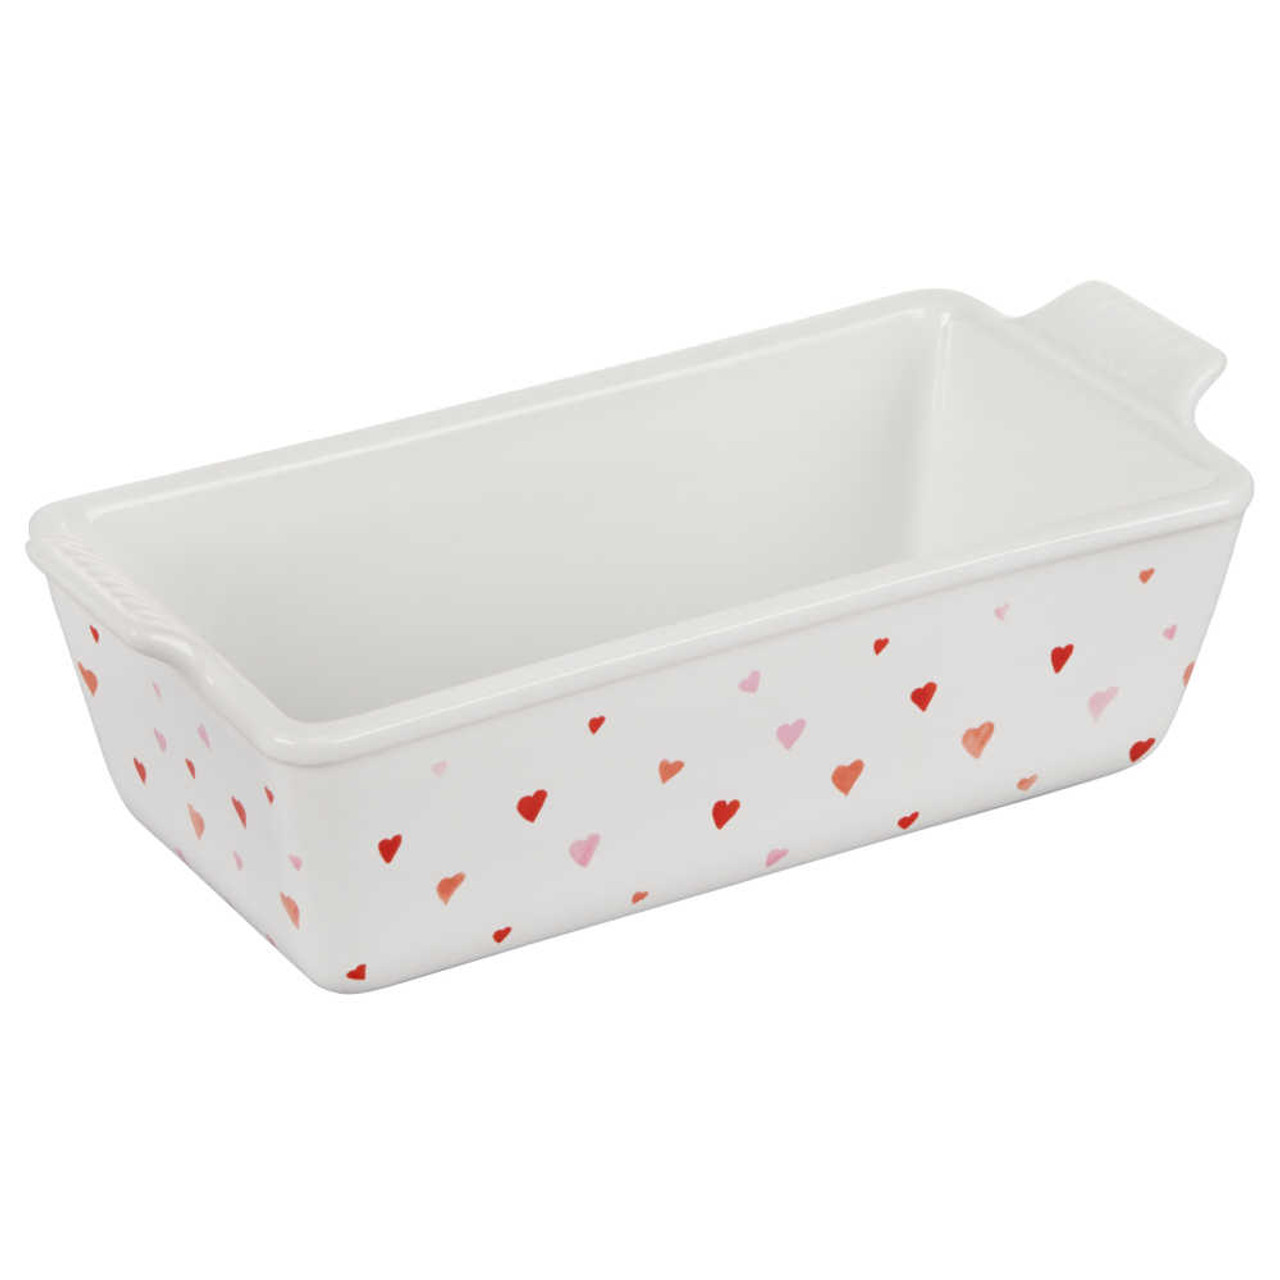 https://cdn11.bigcommerce.com/s-hccytny0od/images/stencil/1280x1280/products/5219/22503/Le_Creuset_LAmour_Collection_Heritage_Loaf_Pan__19915.1672366134.jpg?c=2?imbypass=on